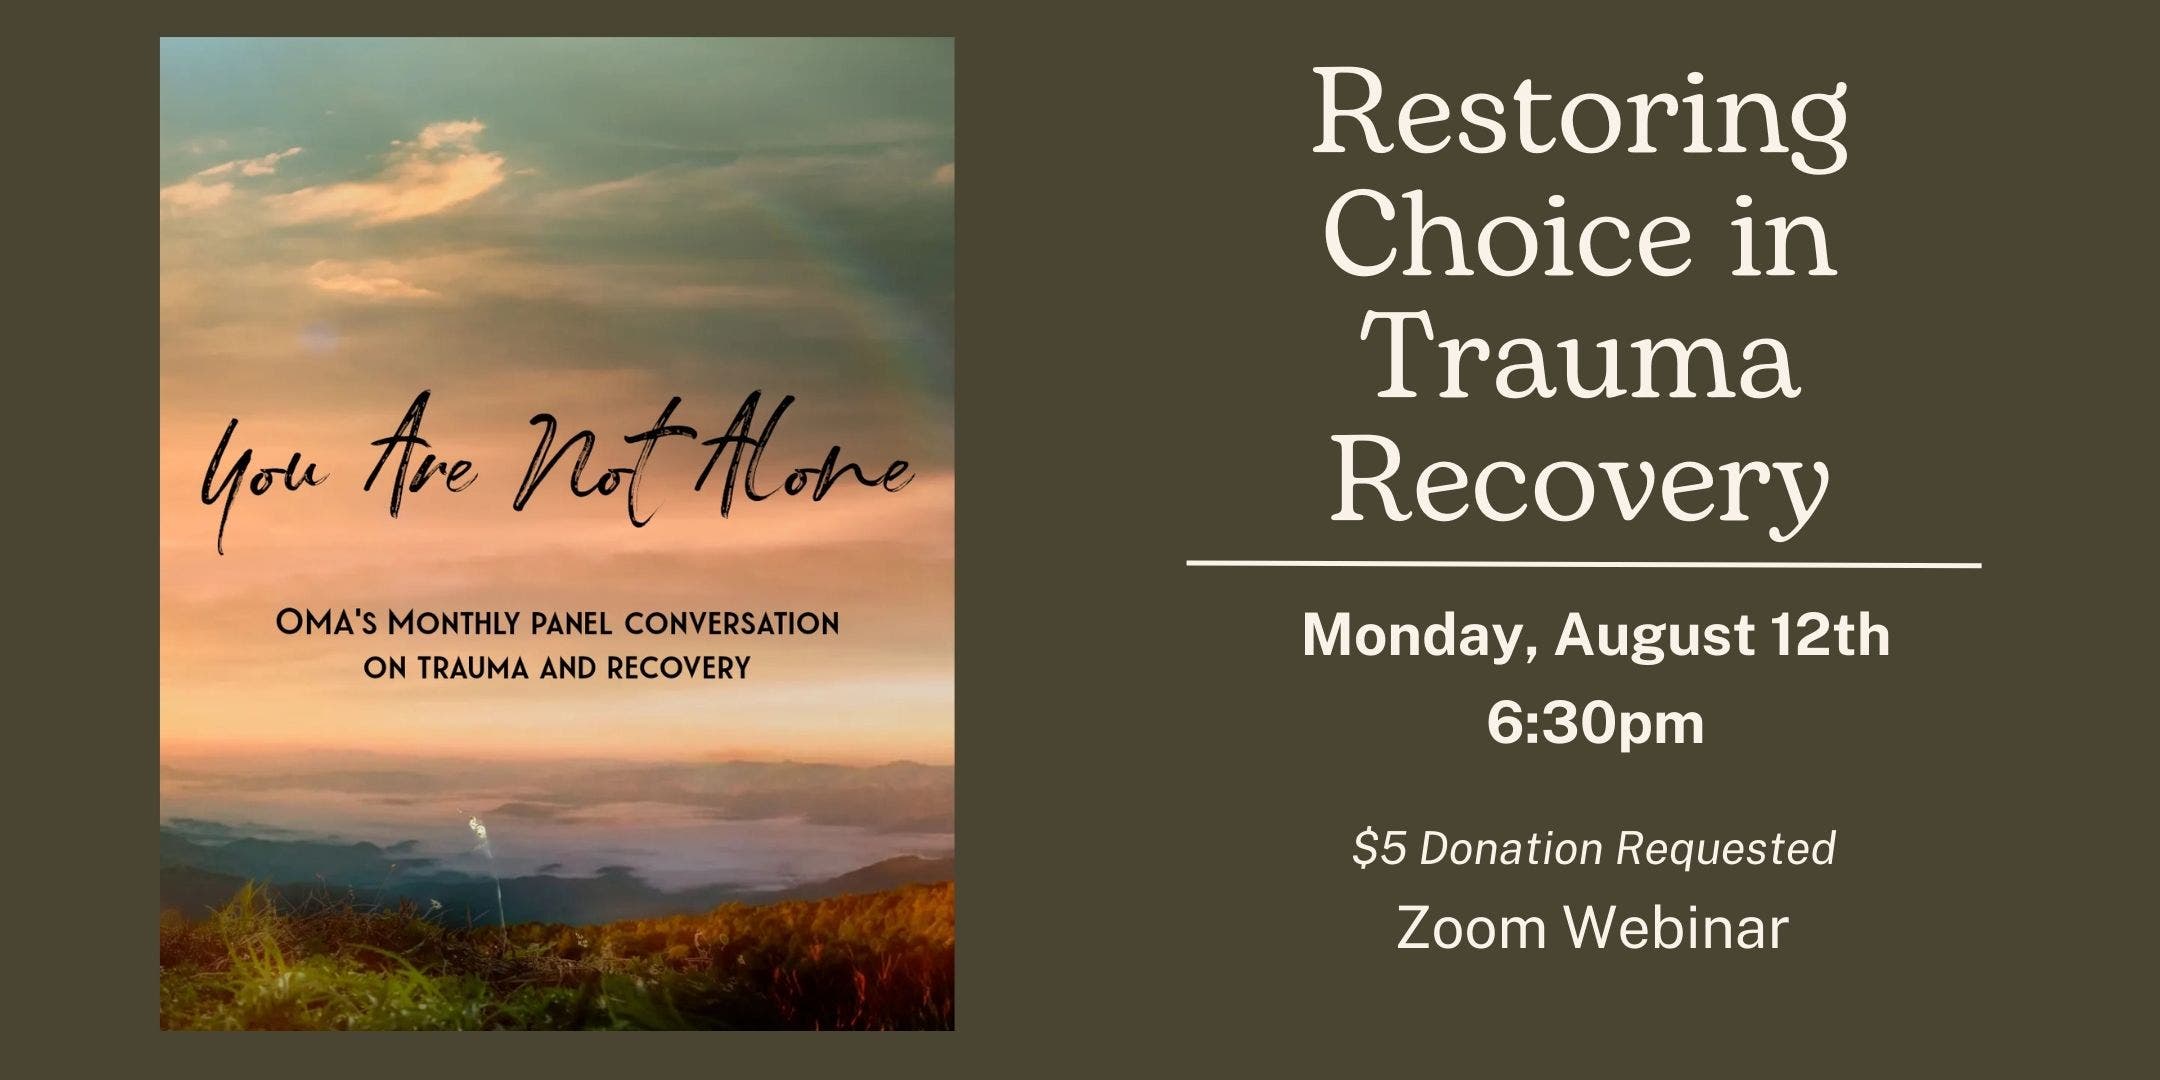 You Are Not Alone: Restoring Choice in Trauma Recovery (Webinar Panel Discussion)